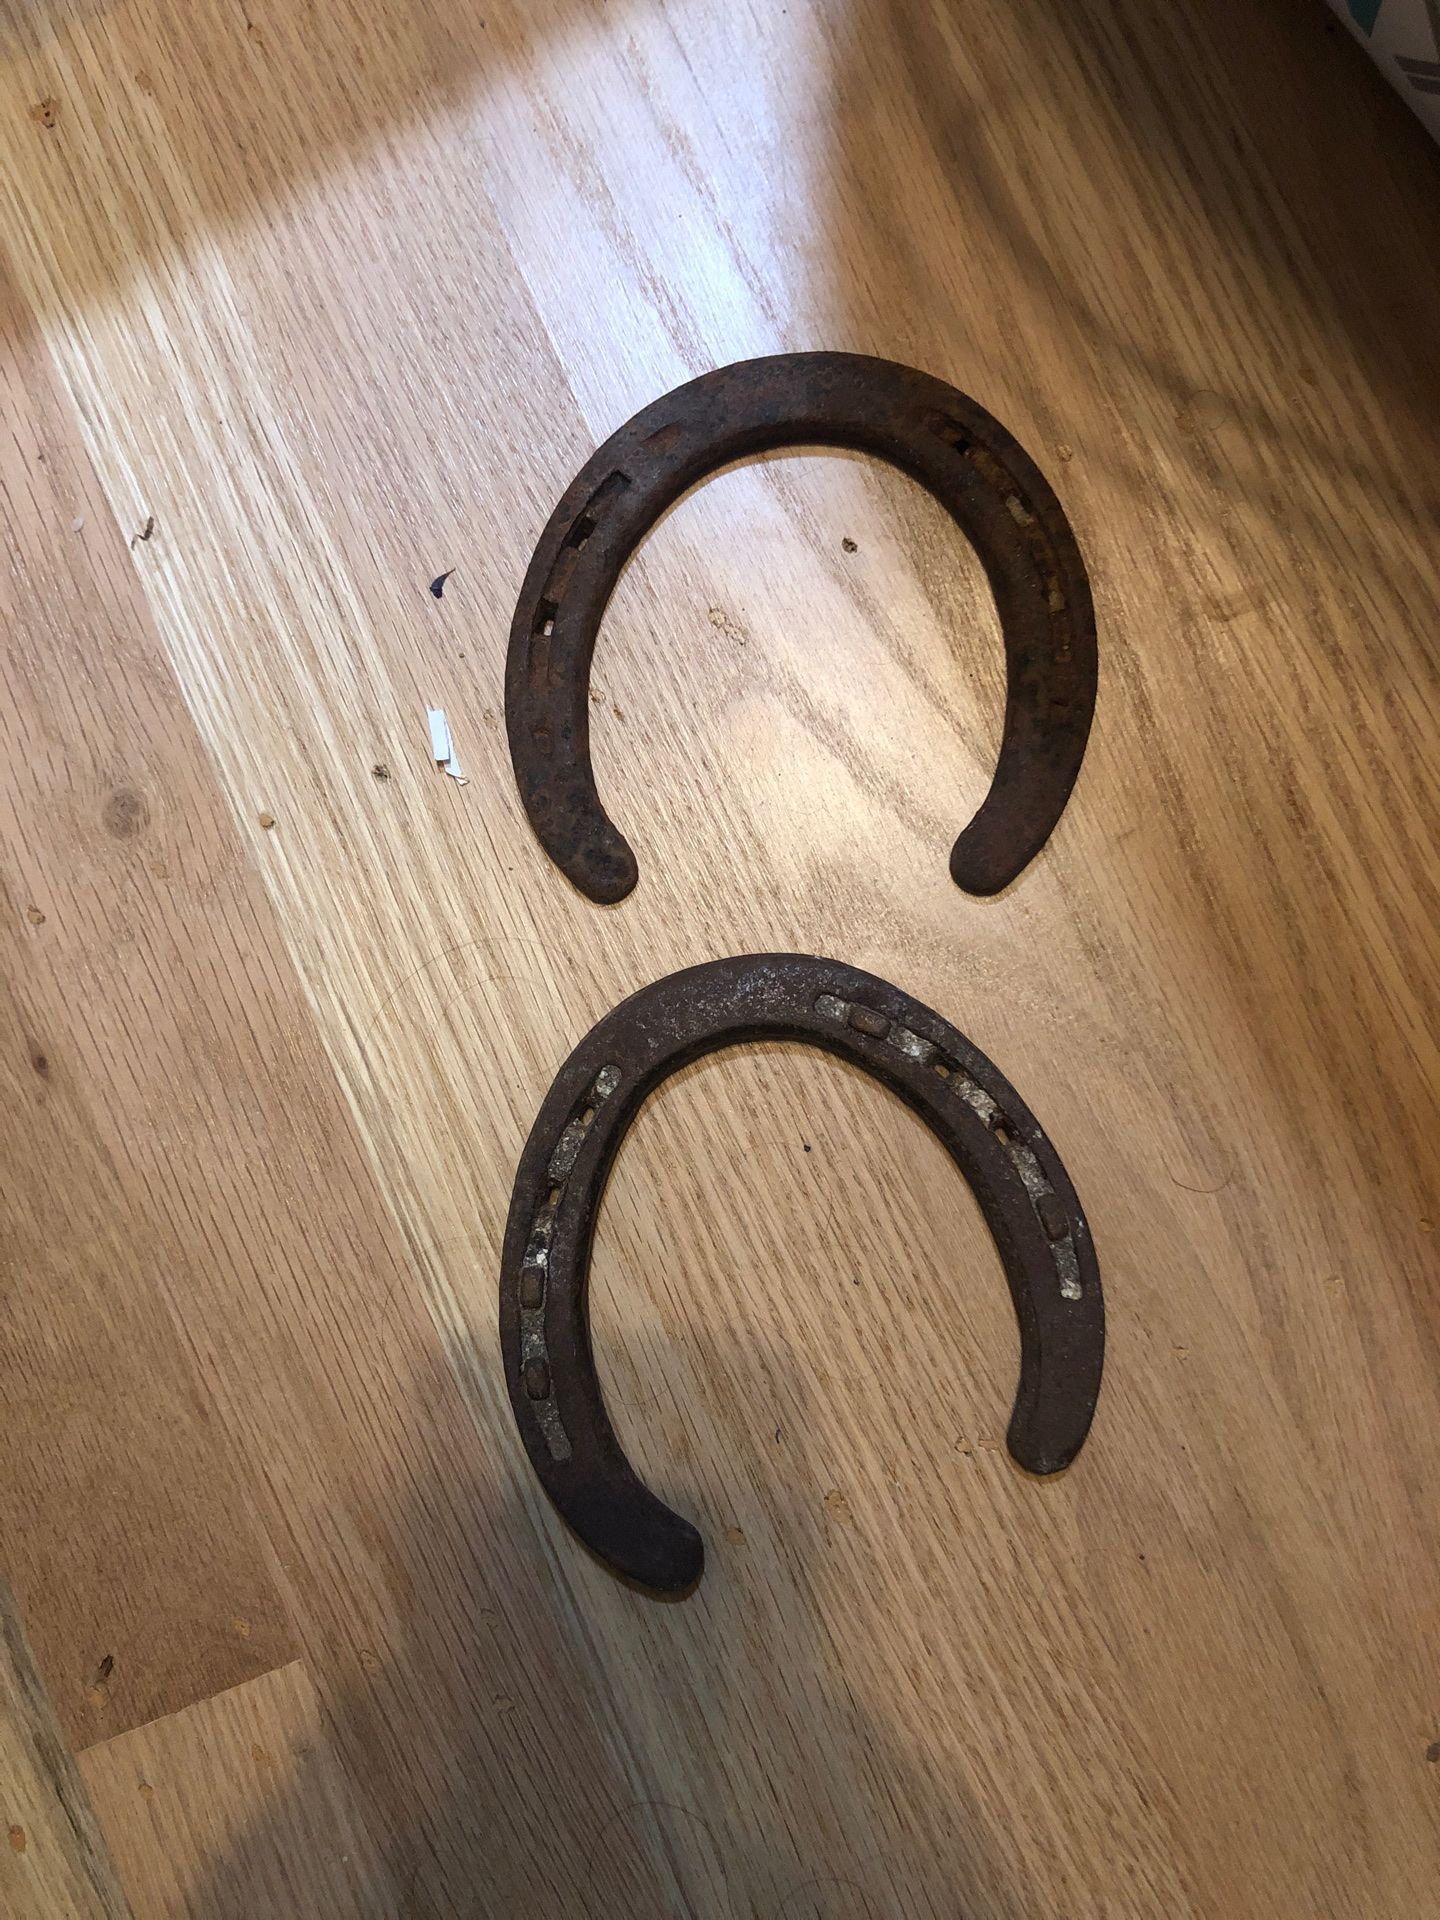 Old horse shoes